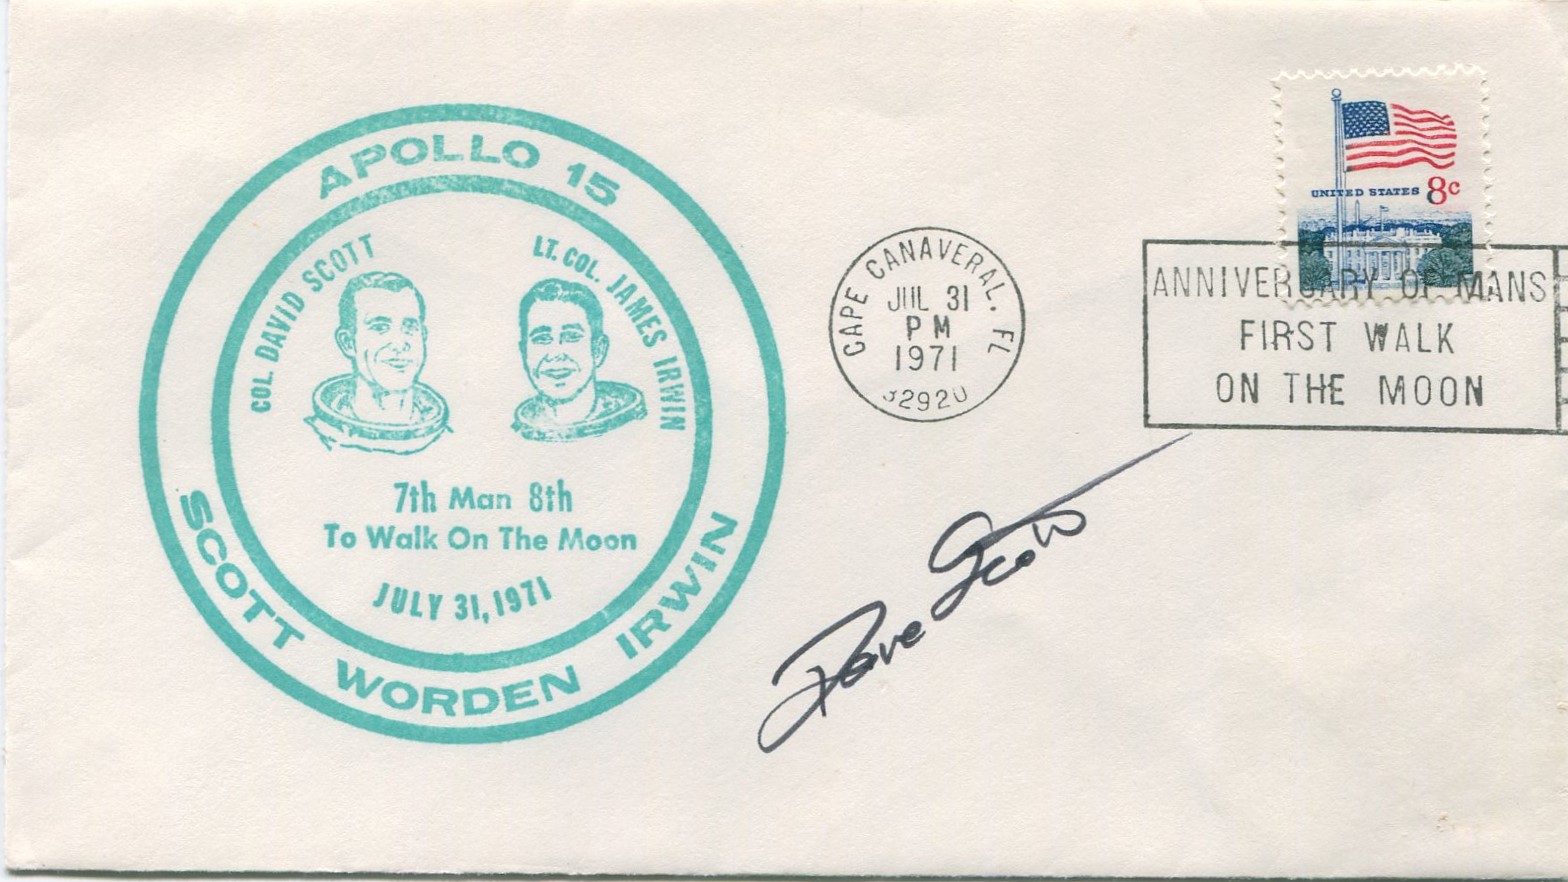 ASTRONAUTS: Small selection of signed Commemorative covers by various American astronauts.